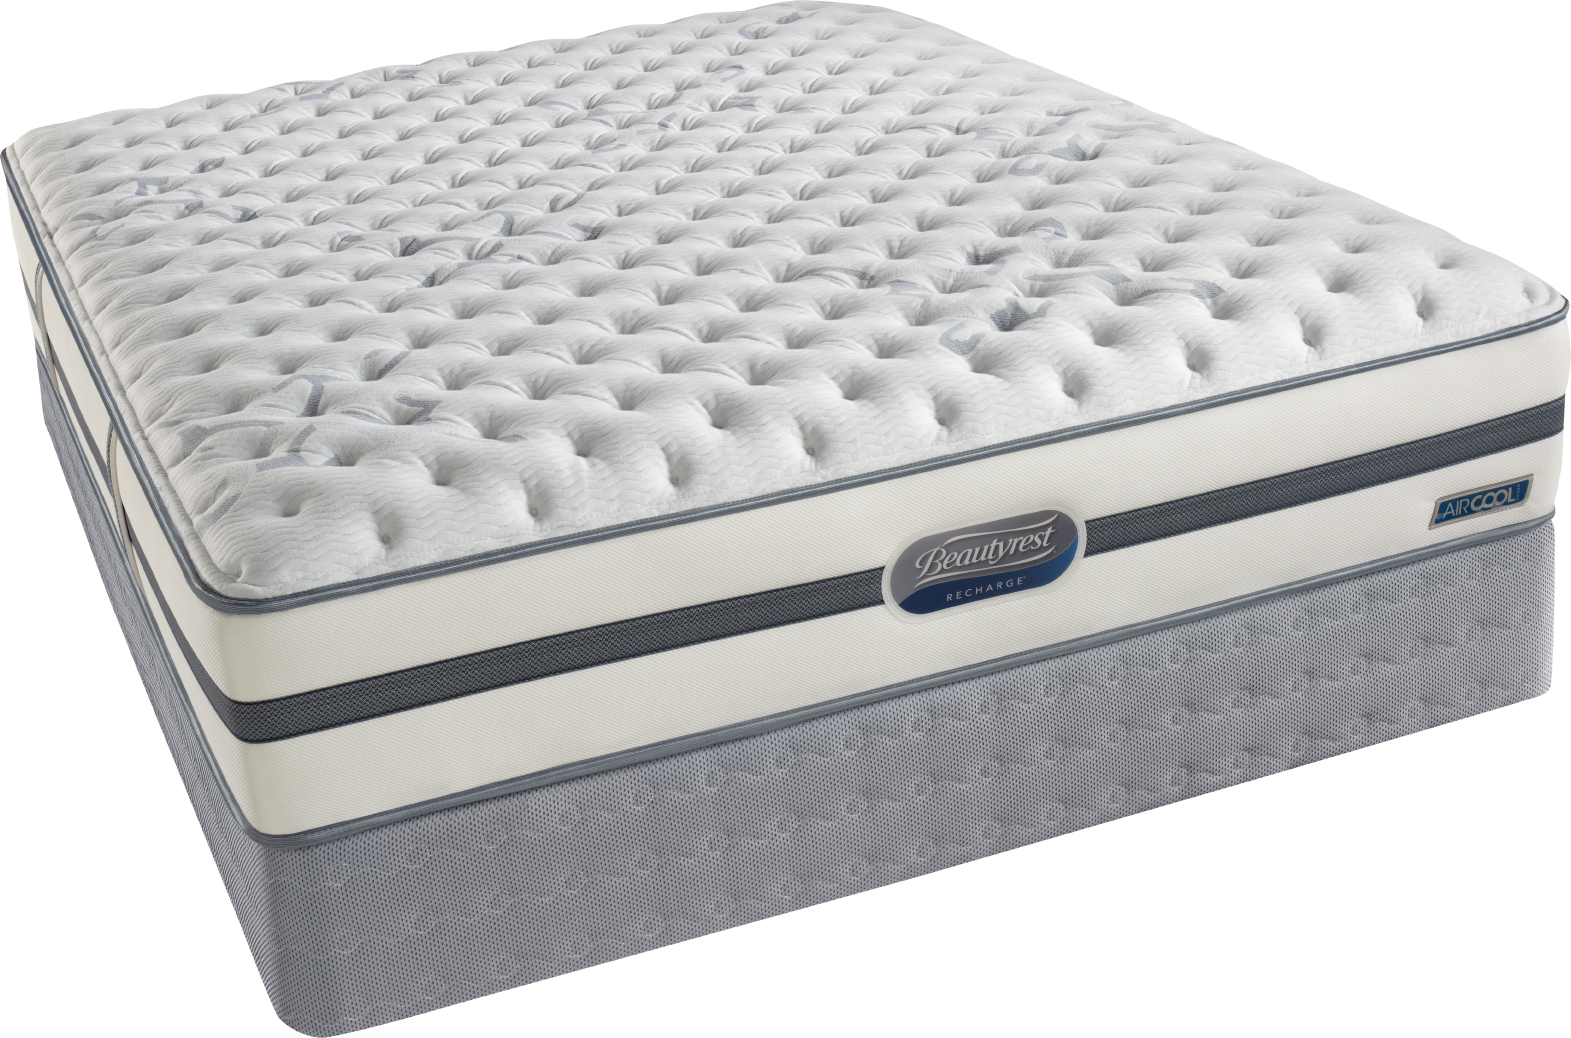 Find 59+ Captivating simmons beautyrest tight top foam mattress Most Trending, Most Beautiful, And Most Suitable